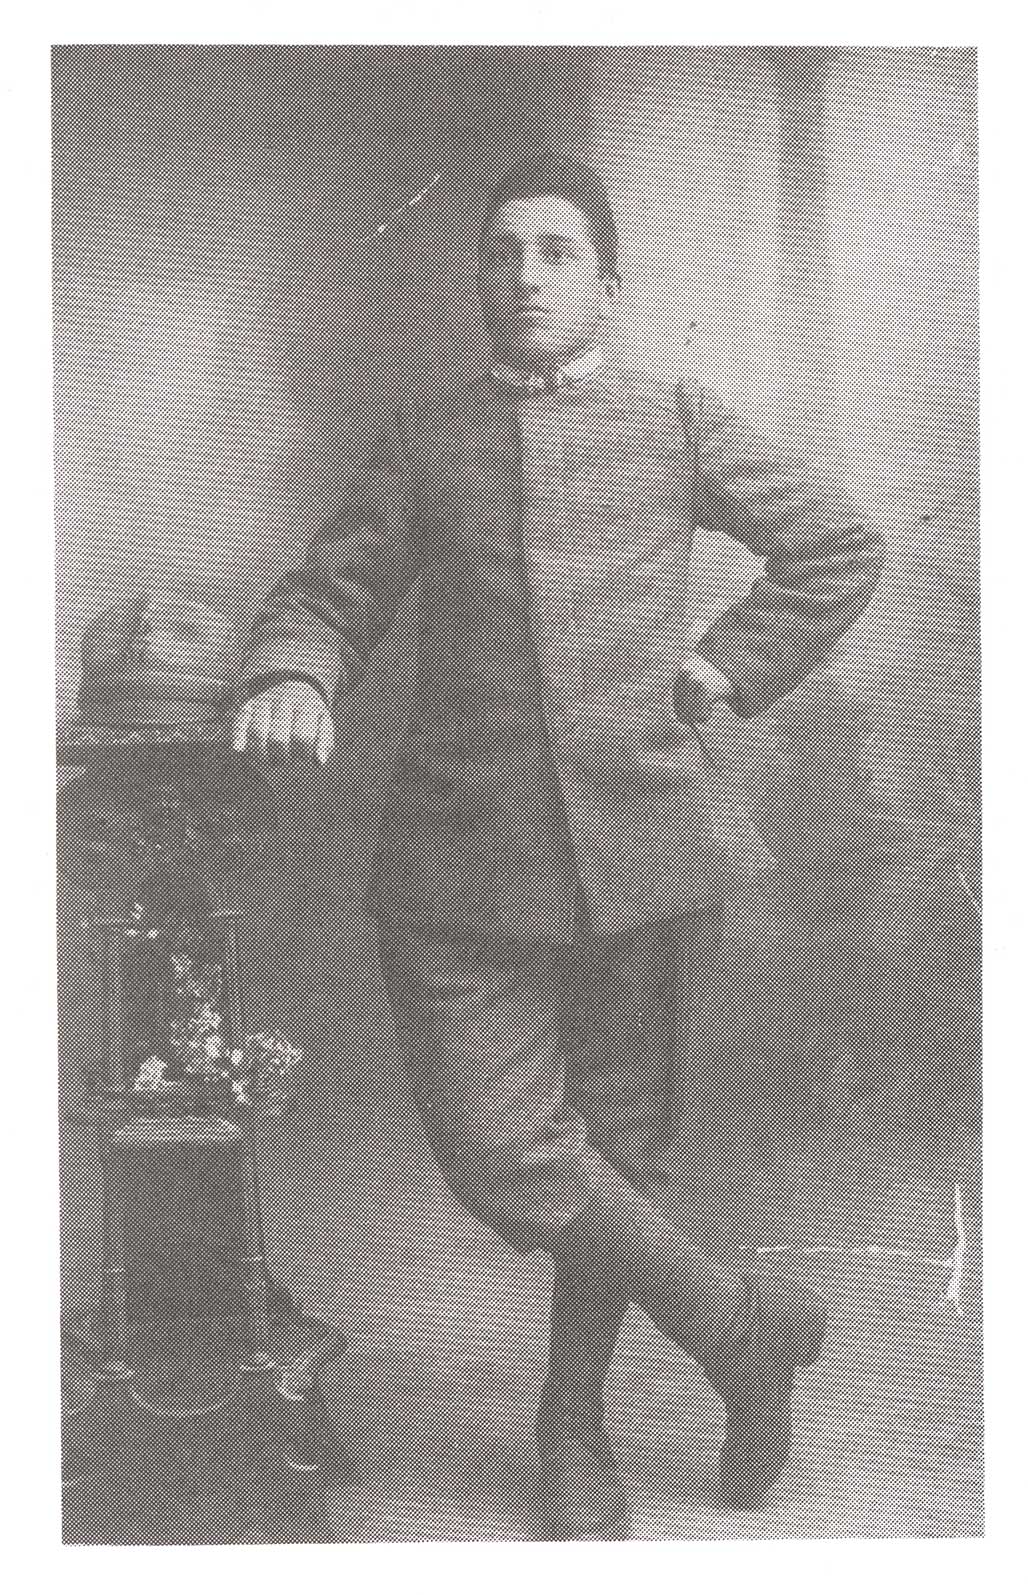 Very old image of a young boy standing with his legs crossed and his hand rests on a shelf.